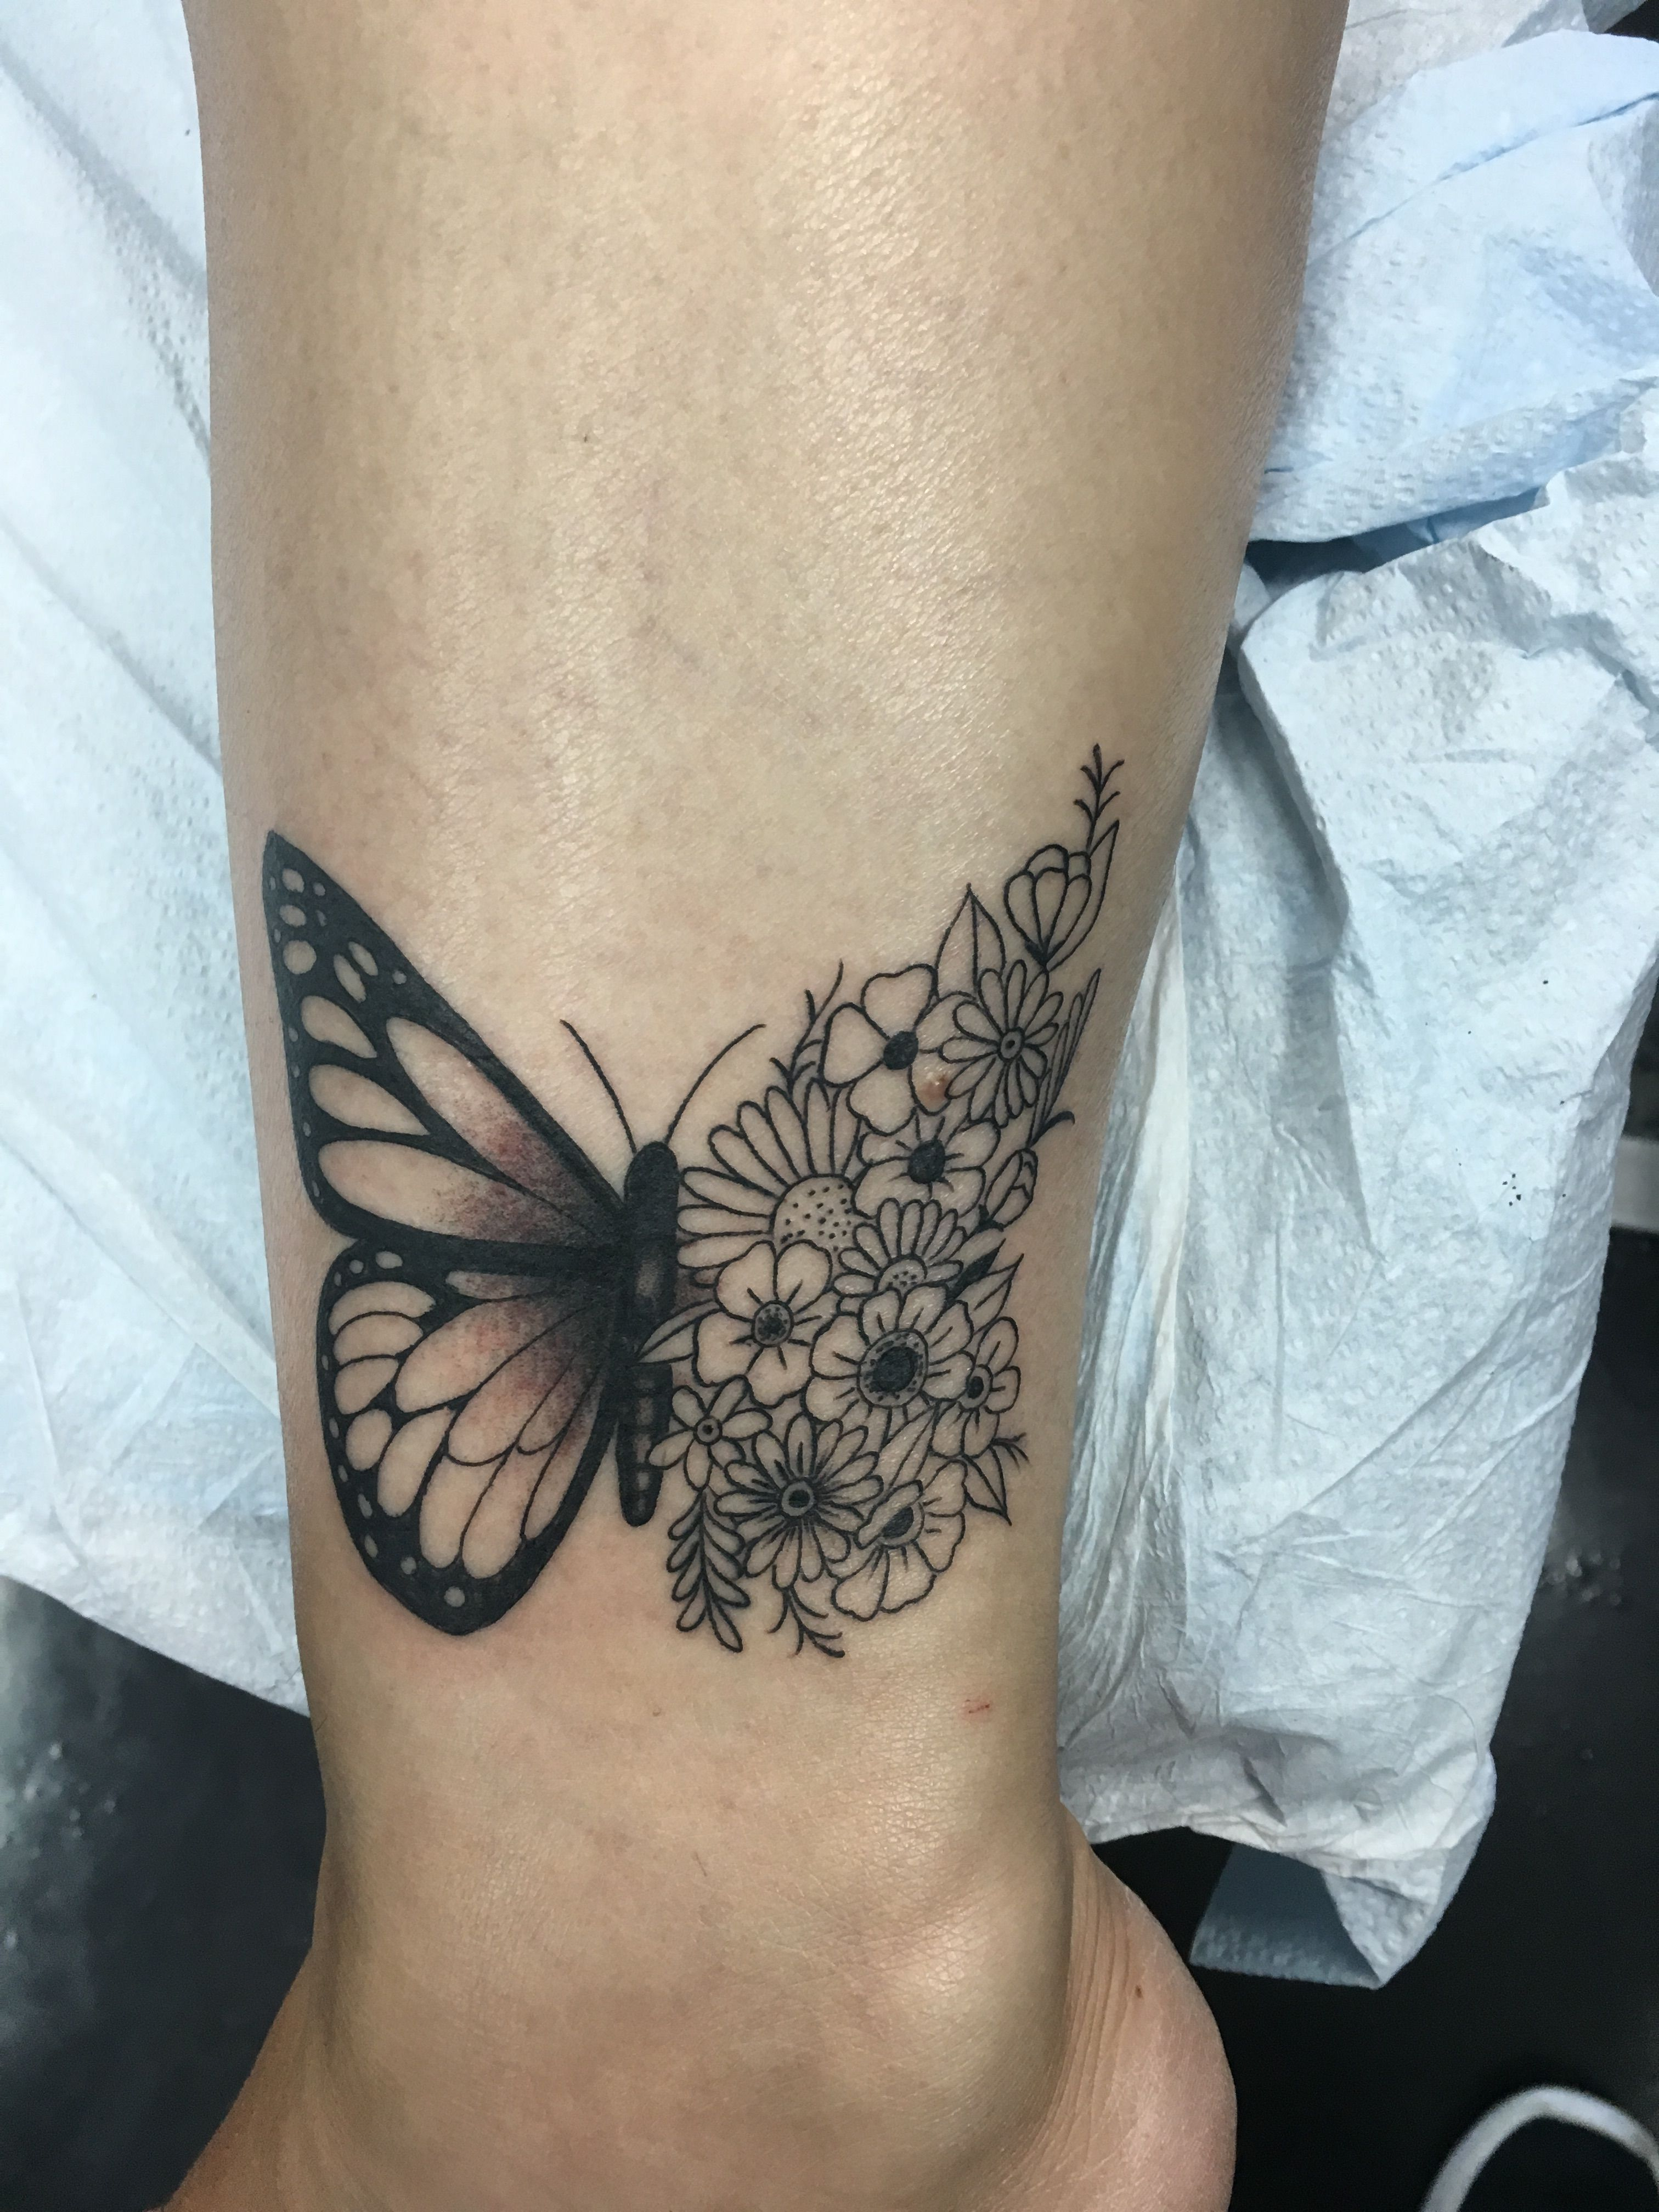 Love My New Butterfly Flower Tattoolooks Perfect On My Ankle pertaining to dimensions 3024 X 4032